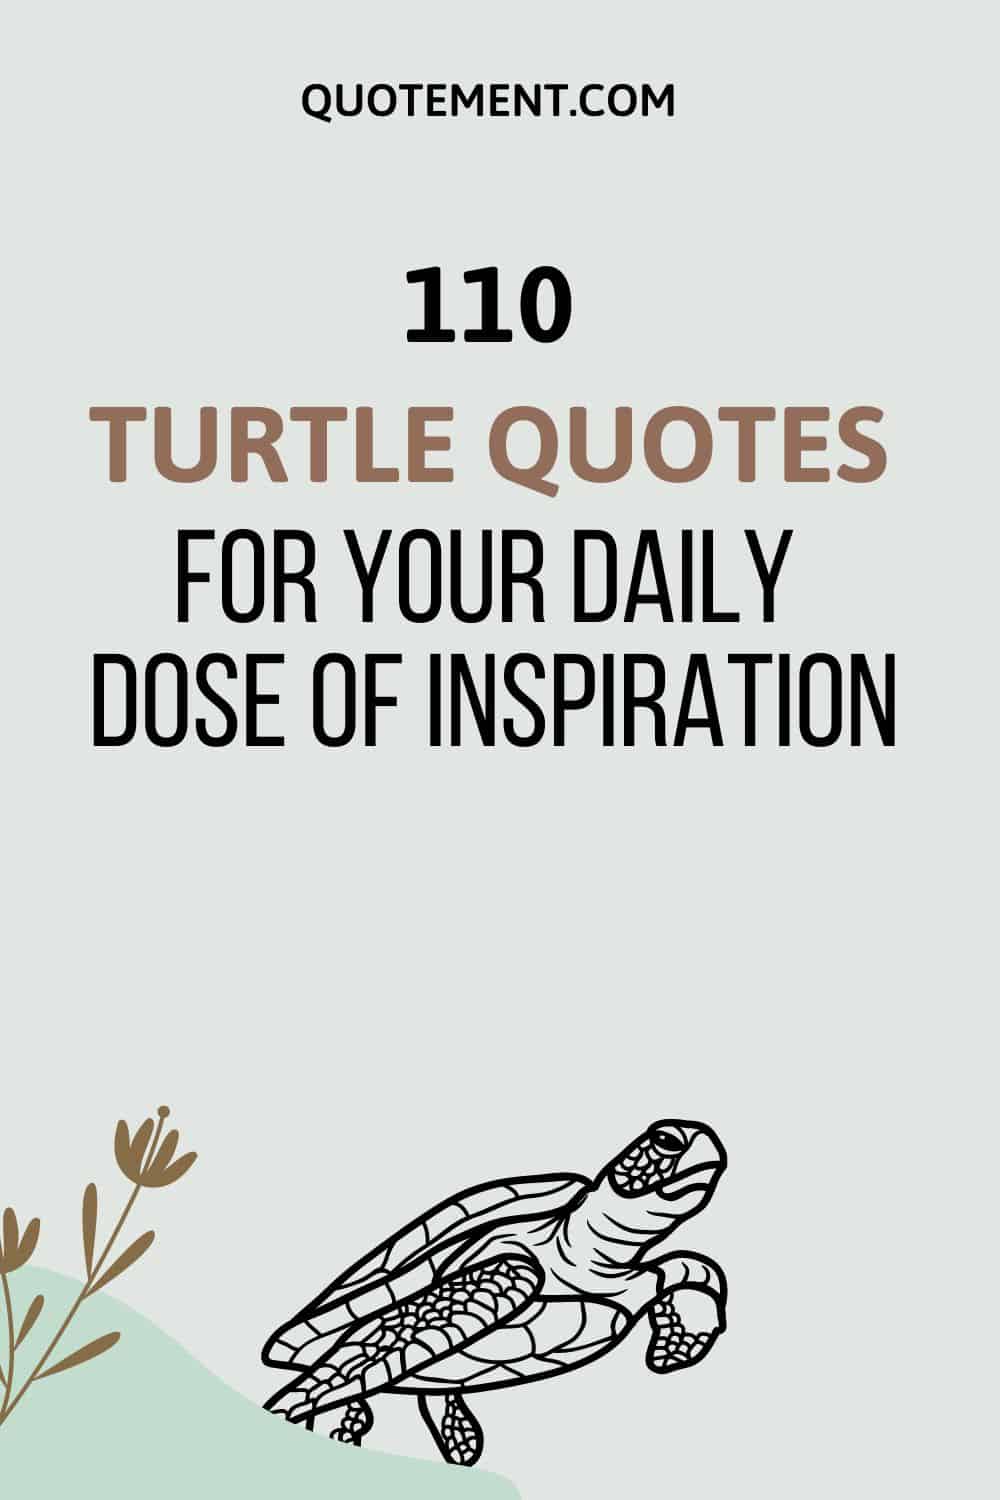 110 Turtle Quotes For Your Daily Dose Of Inspiration
